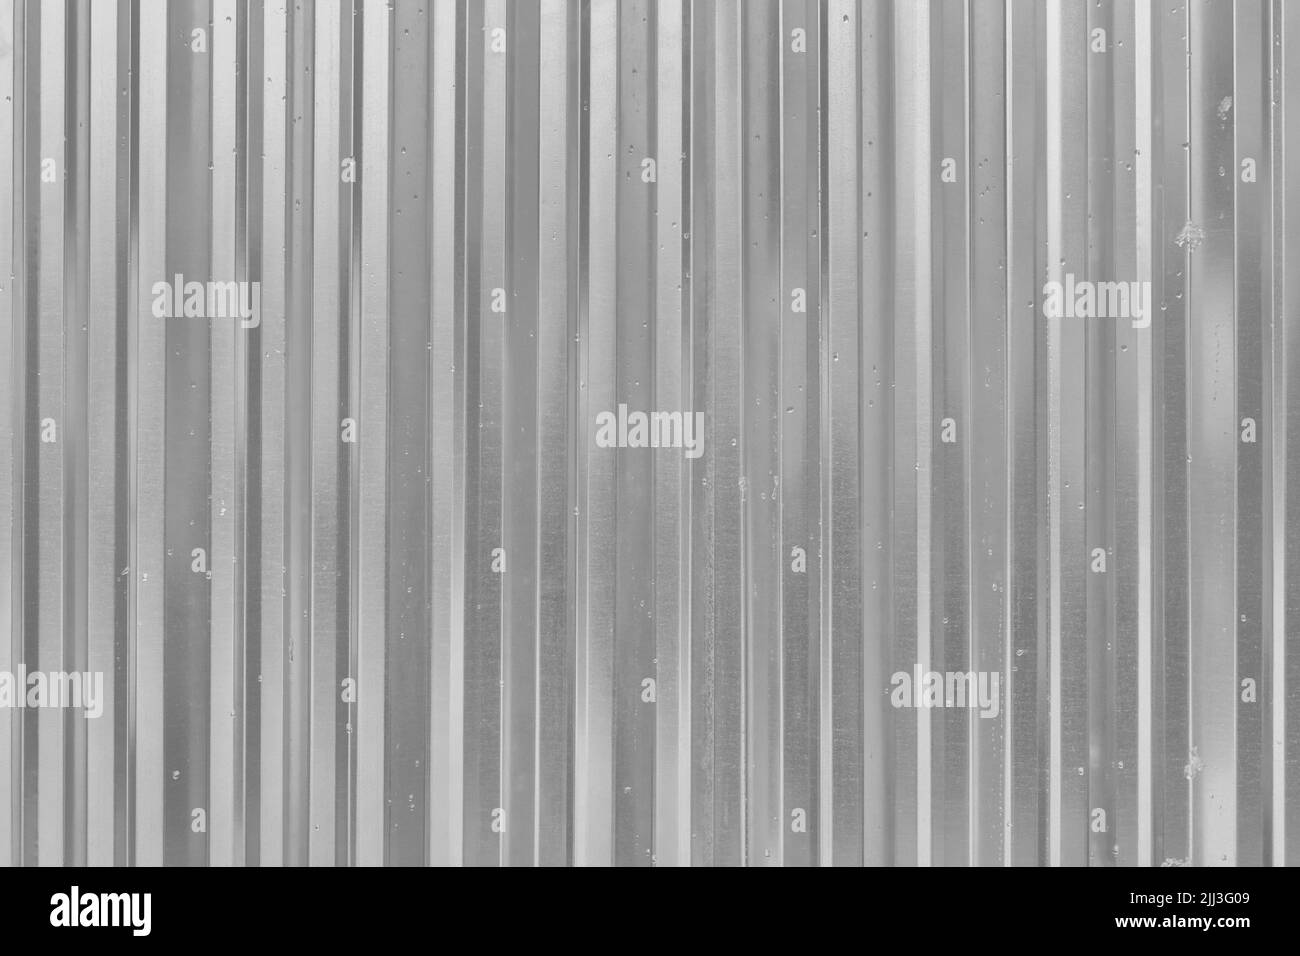 Corrugated Metal Silver Fence Steel Abstract Pattern Texture Grey Background. Stock Photo